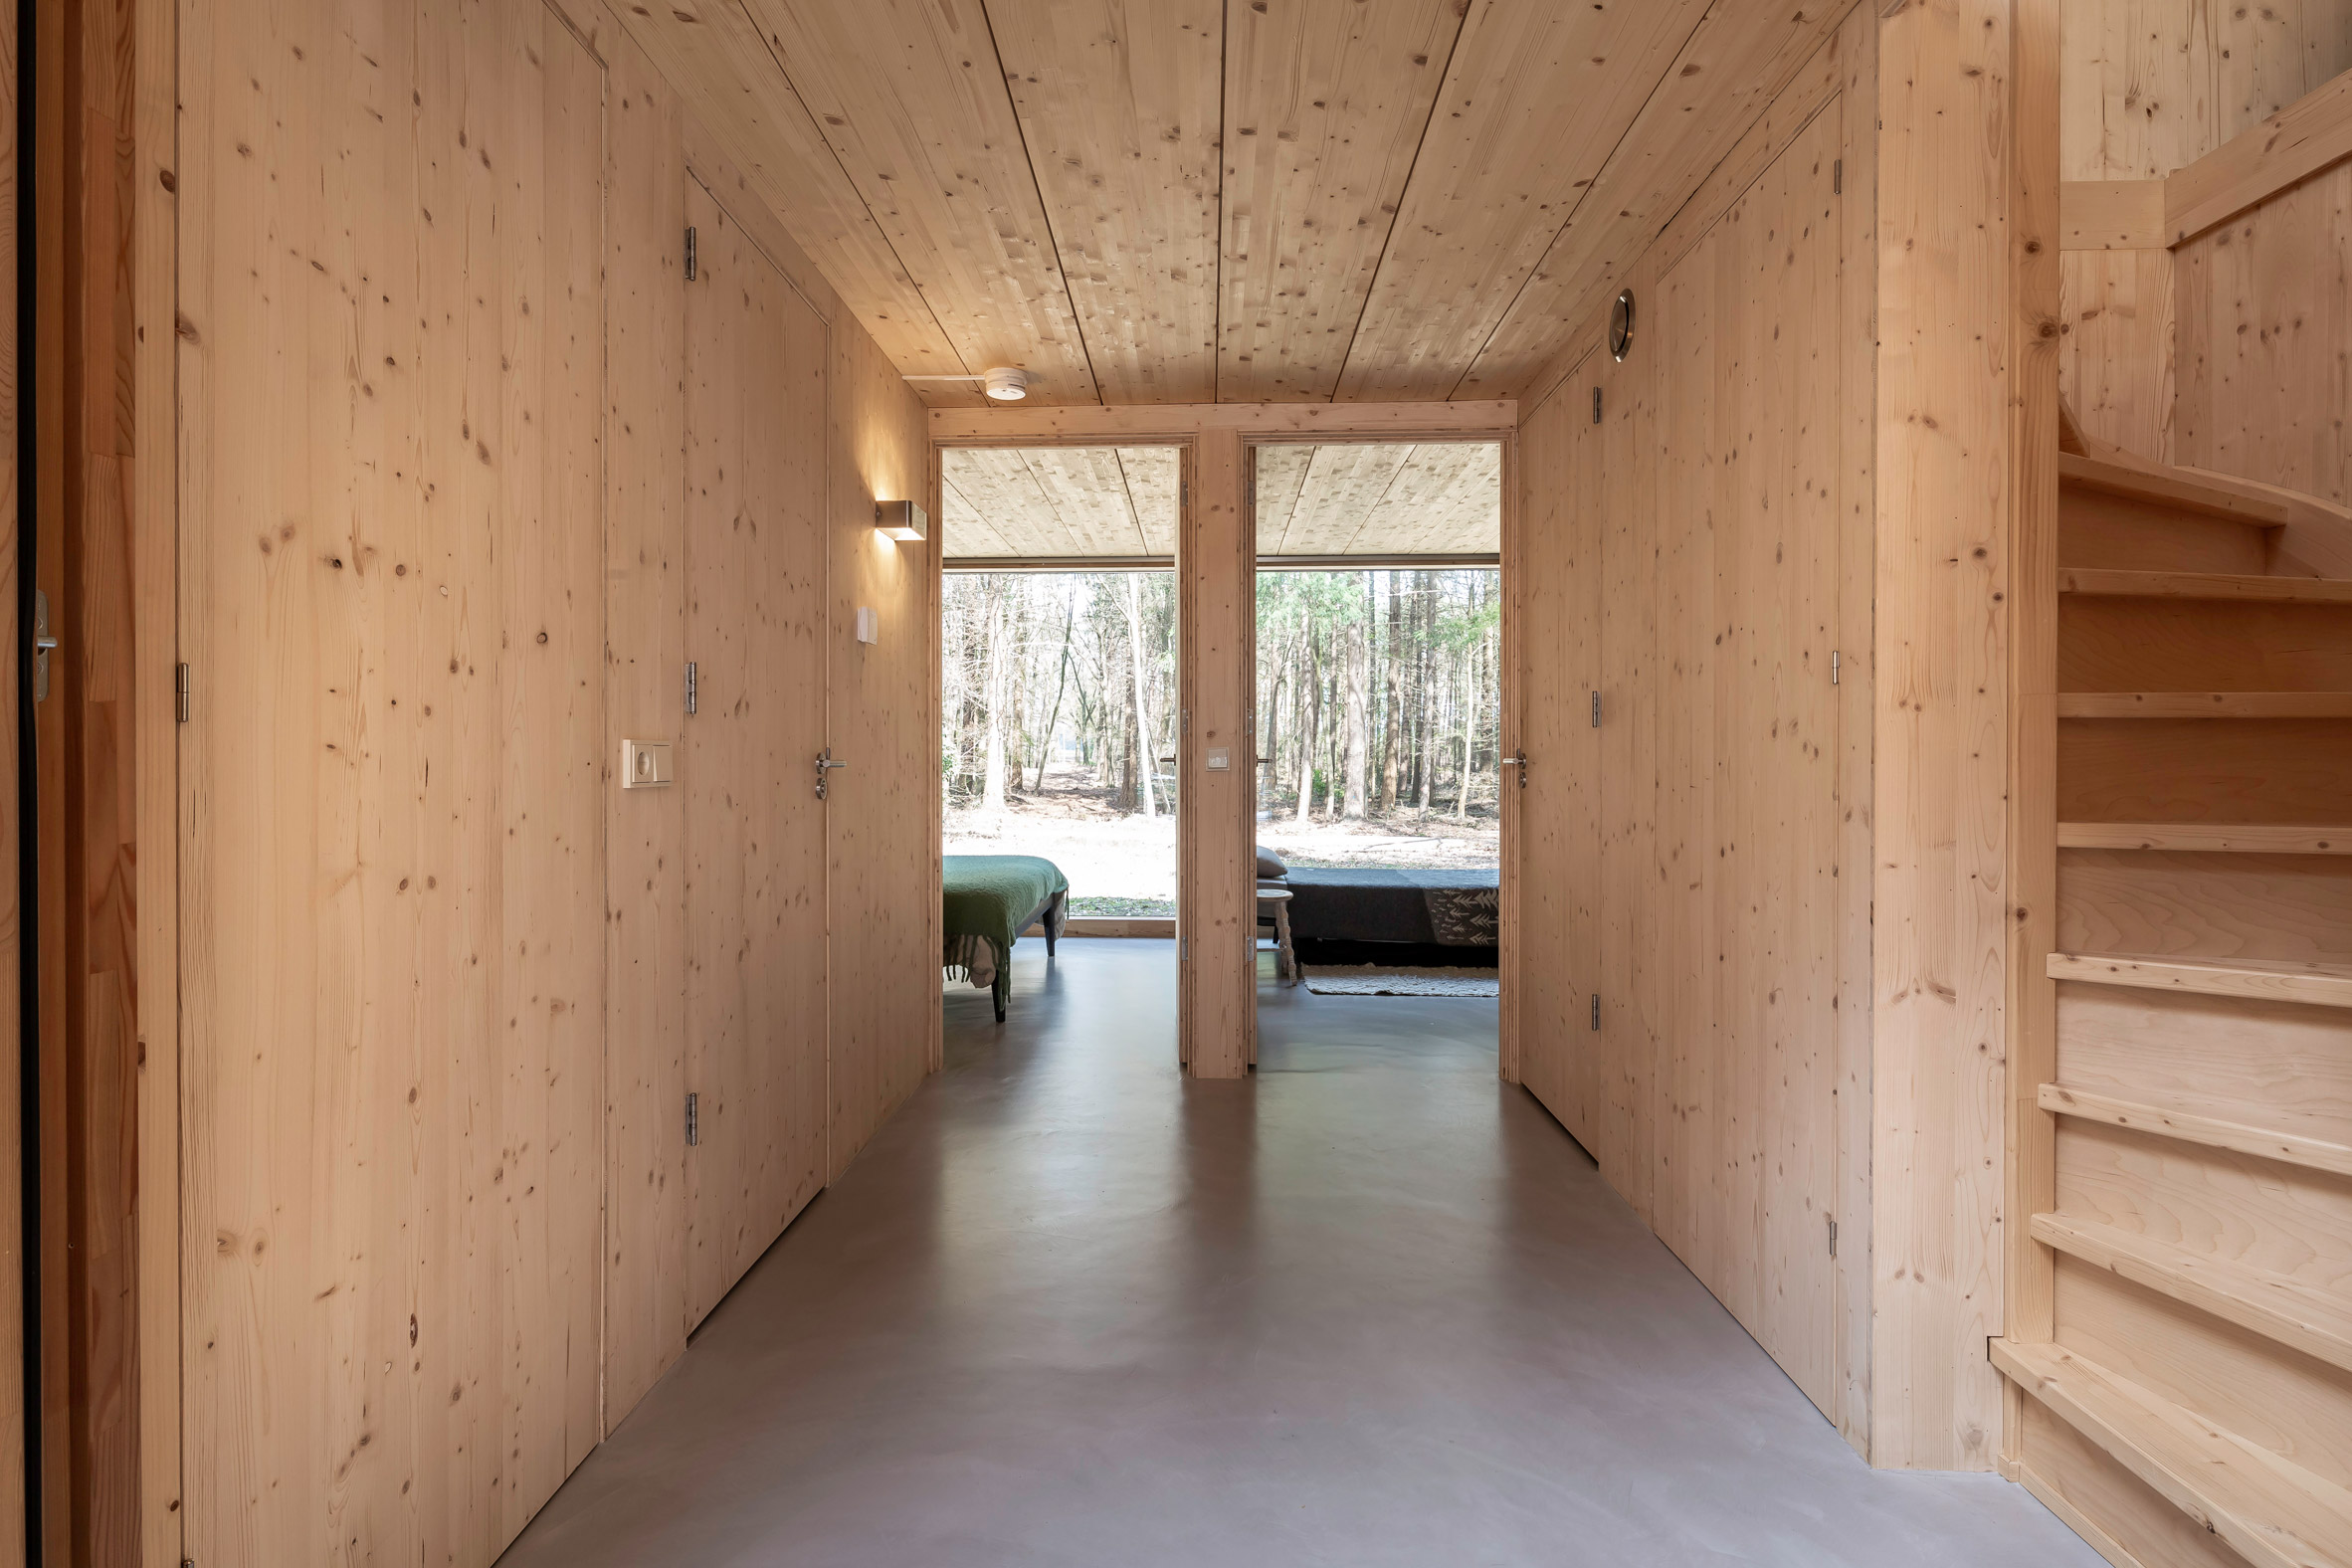 Wood-lined interiors of a Dutch cabin